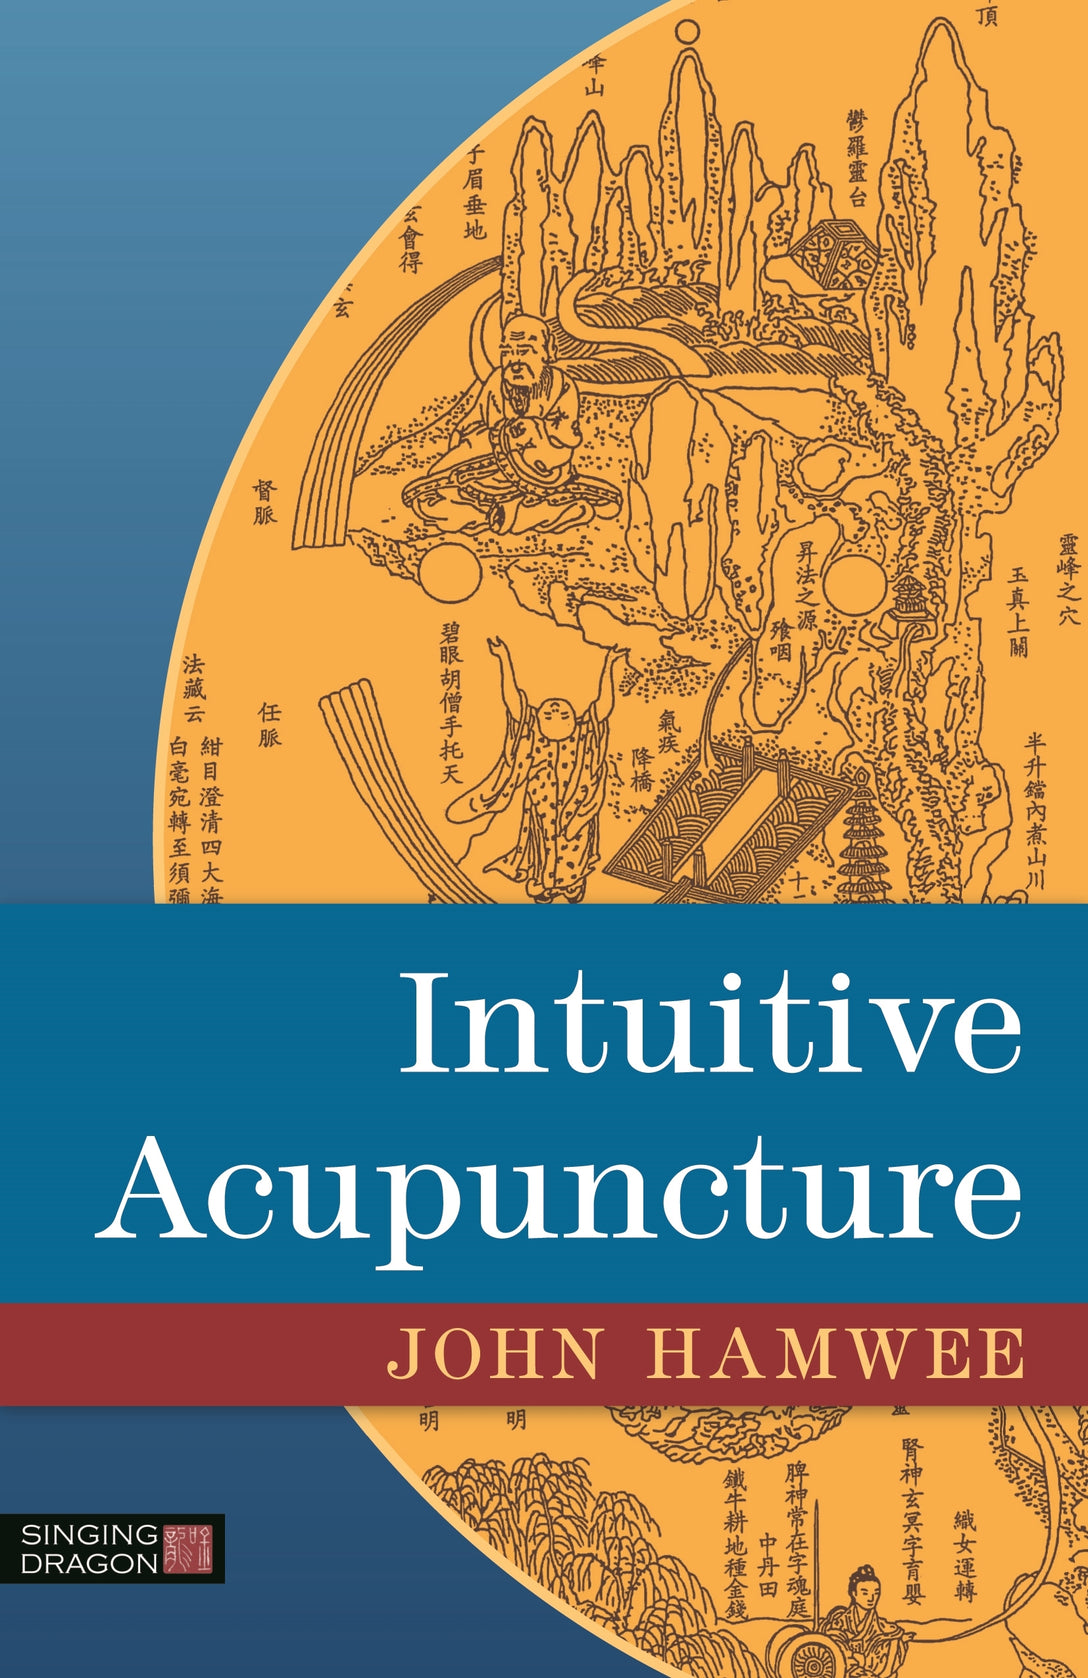 Intuitive Acupuncture by John Hamwee